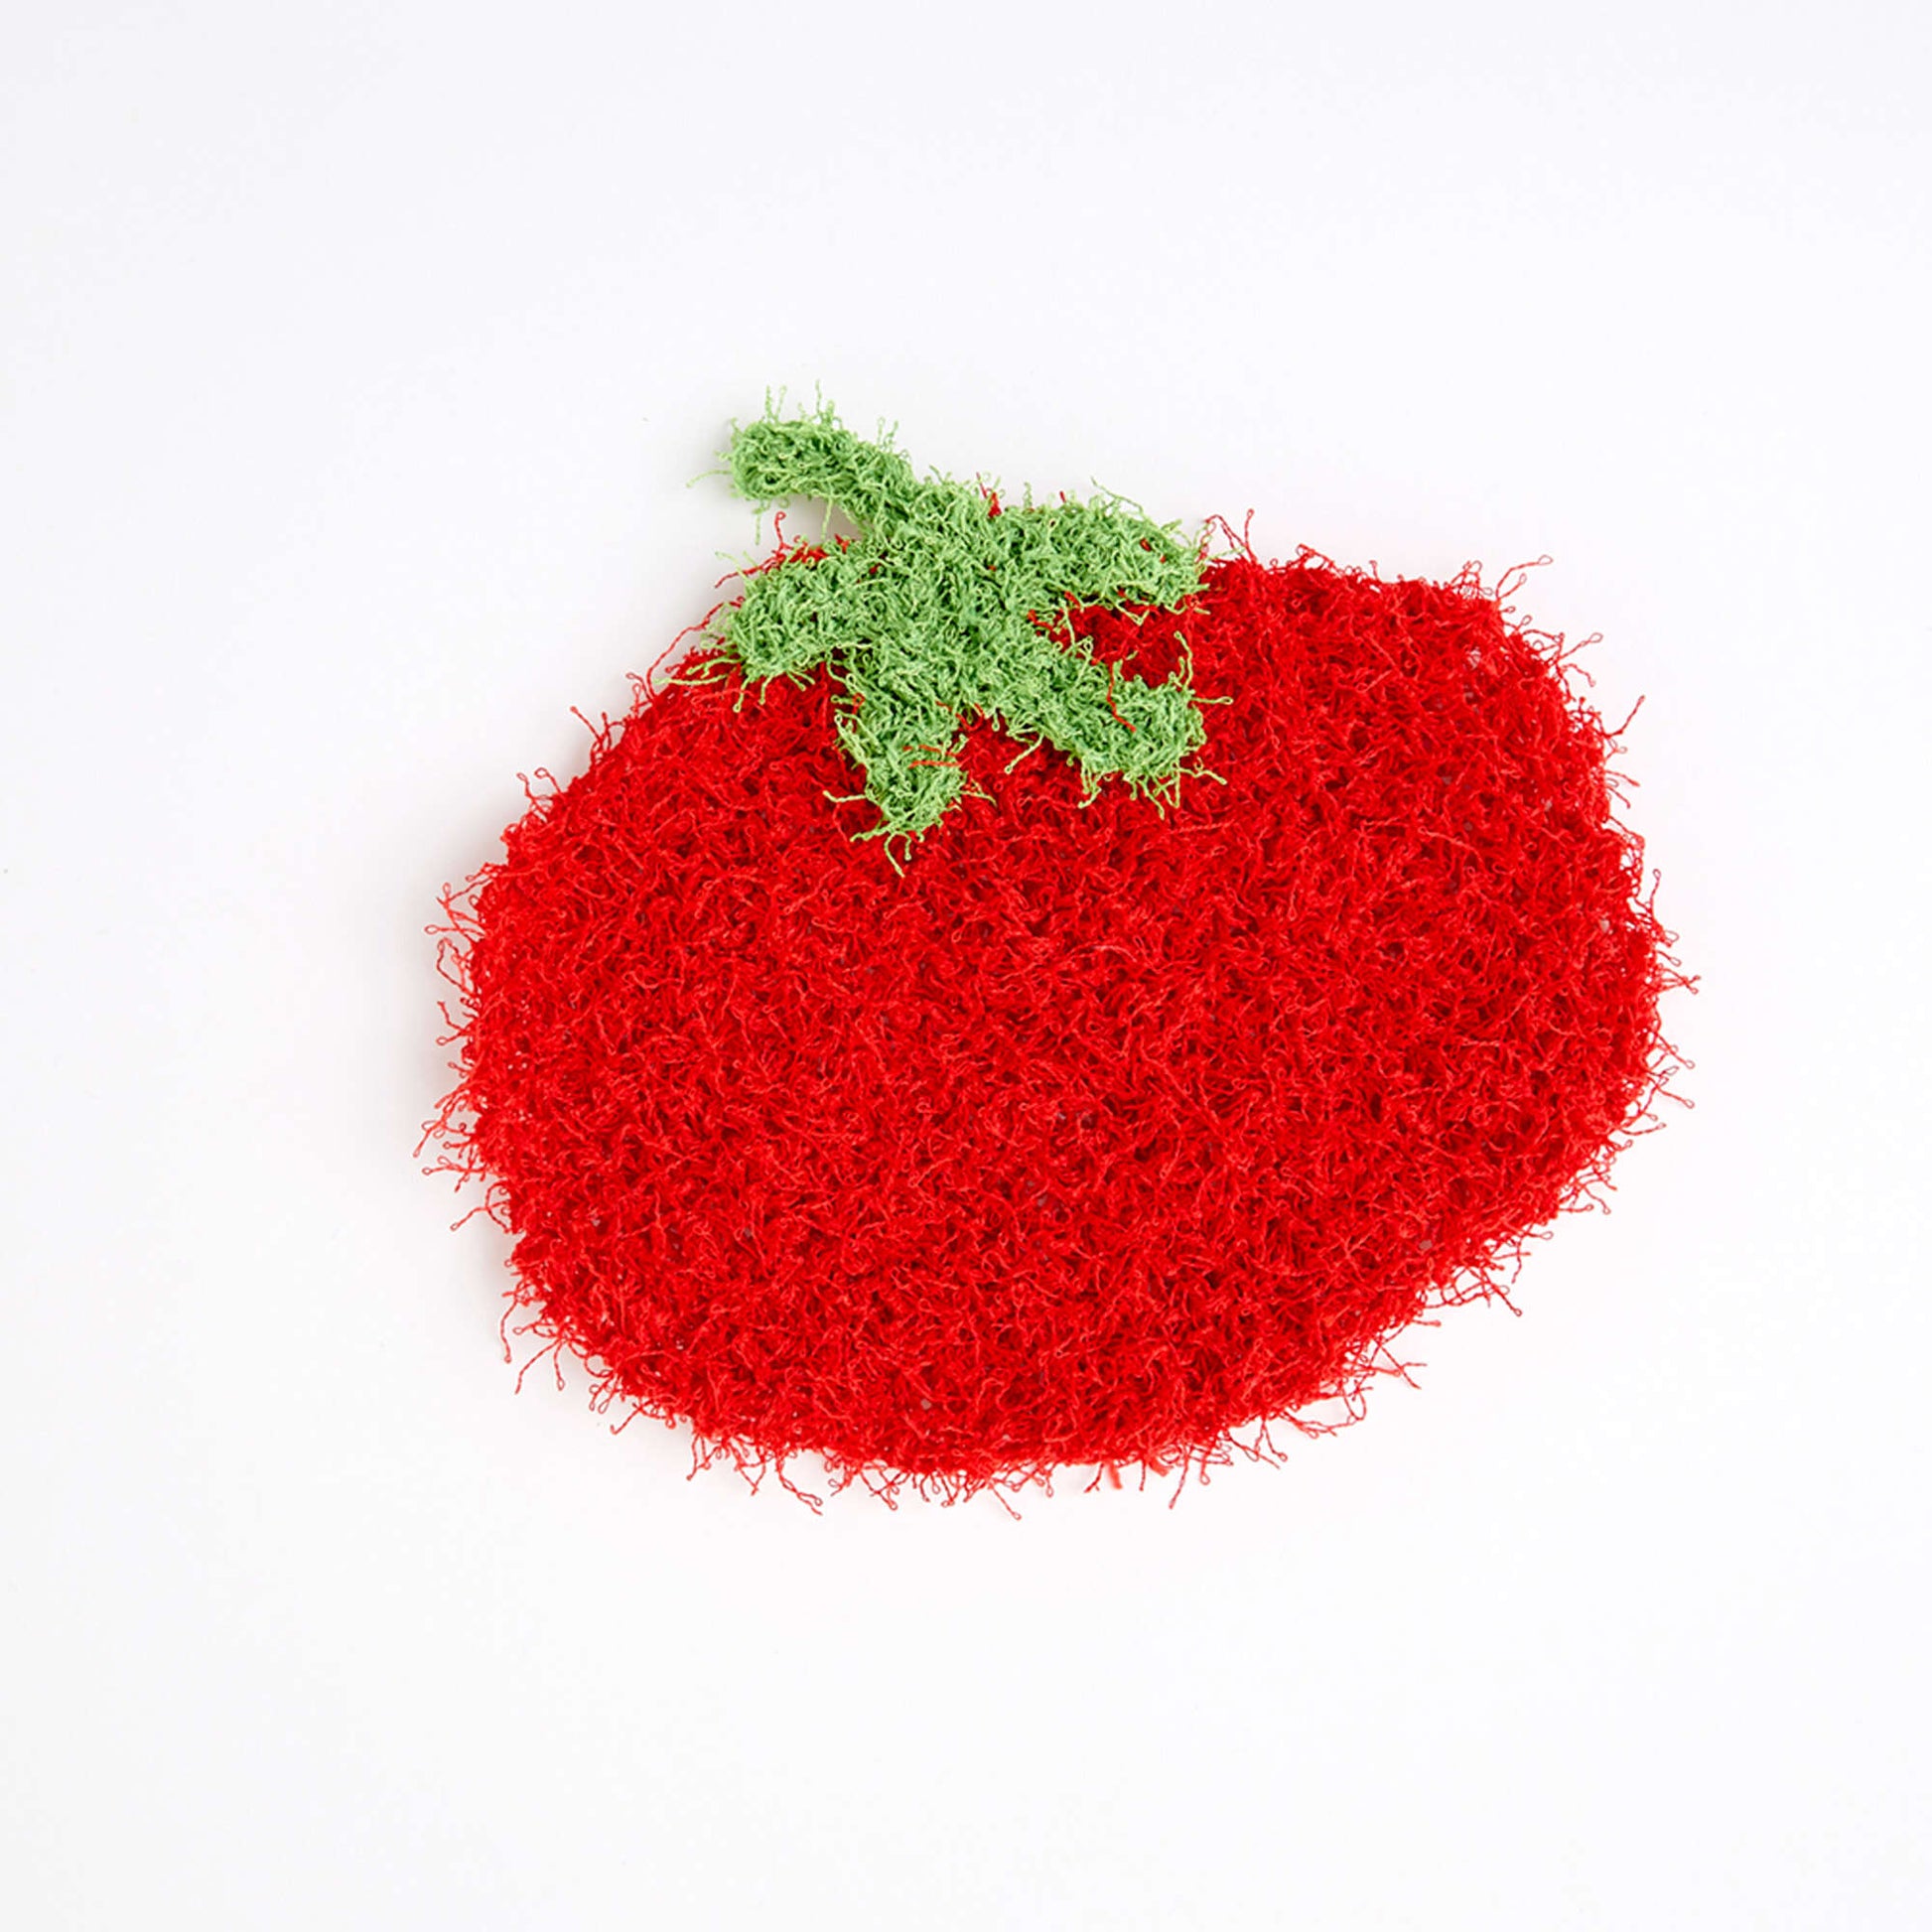 Free Red Heart Tomato Scrubby Pattern